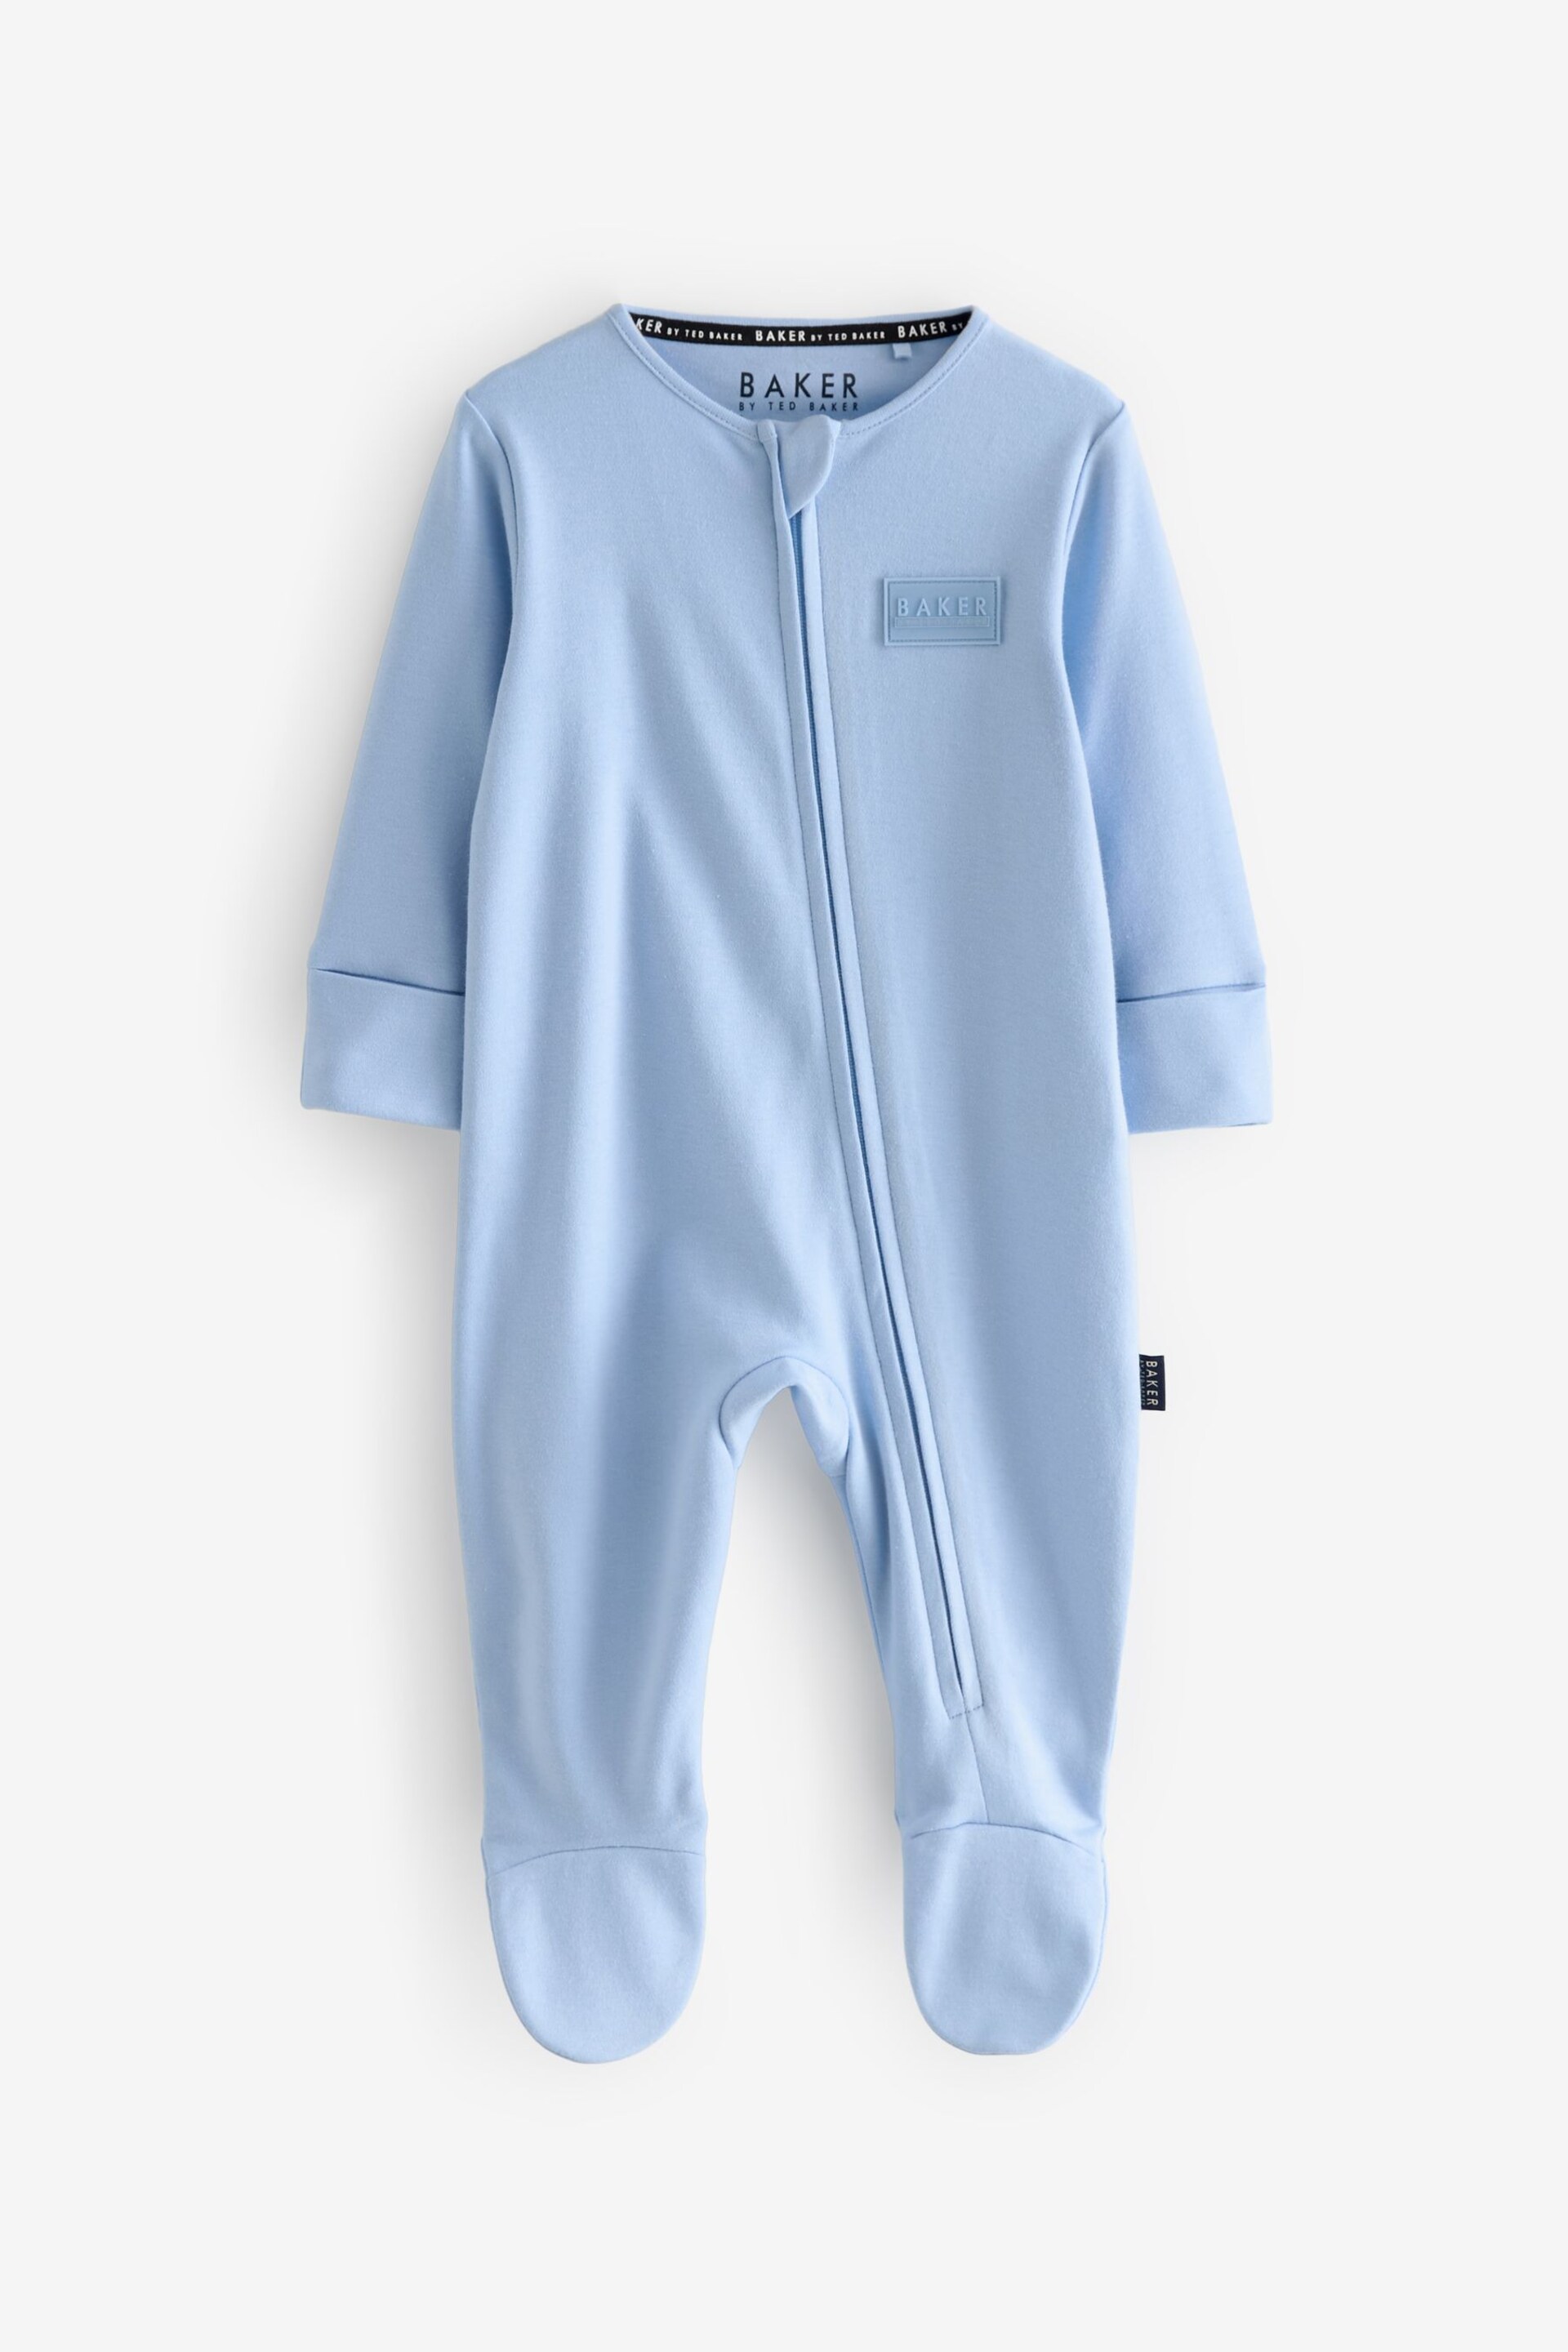 Baker by Ted Baker Sleepsuit 3 Pack - Image 4 of 7